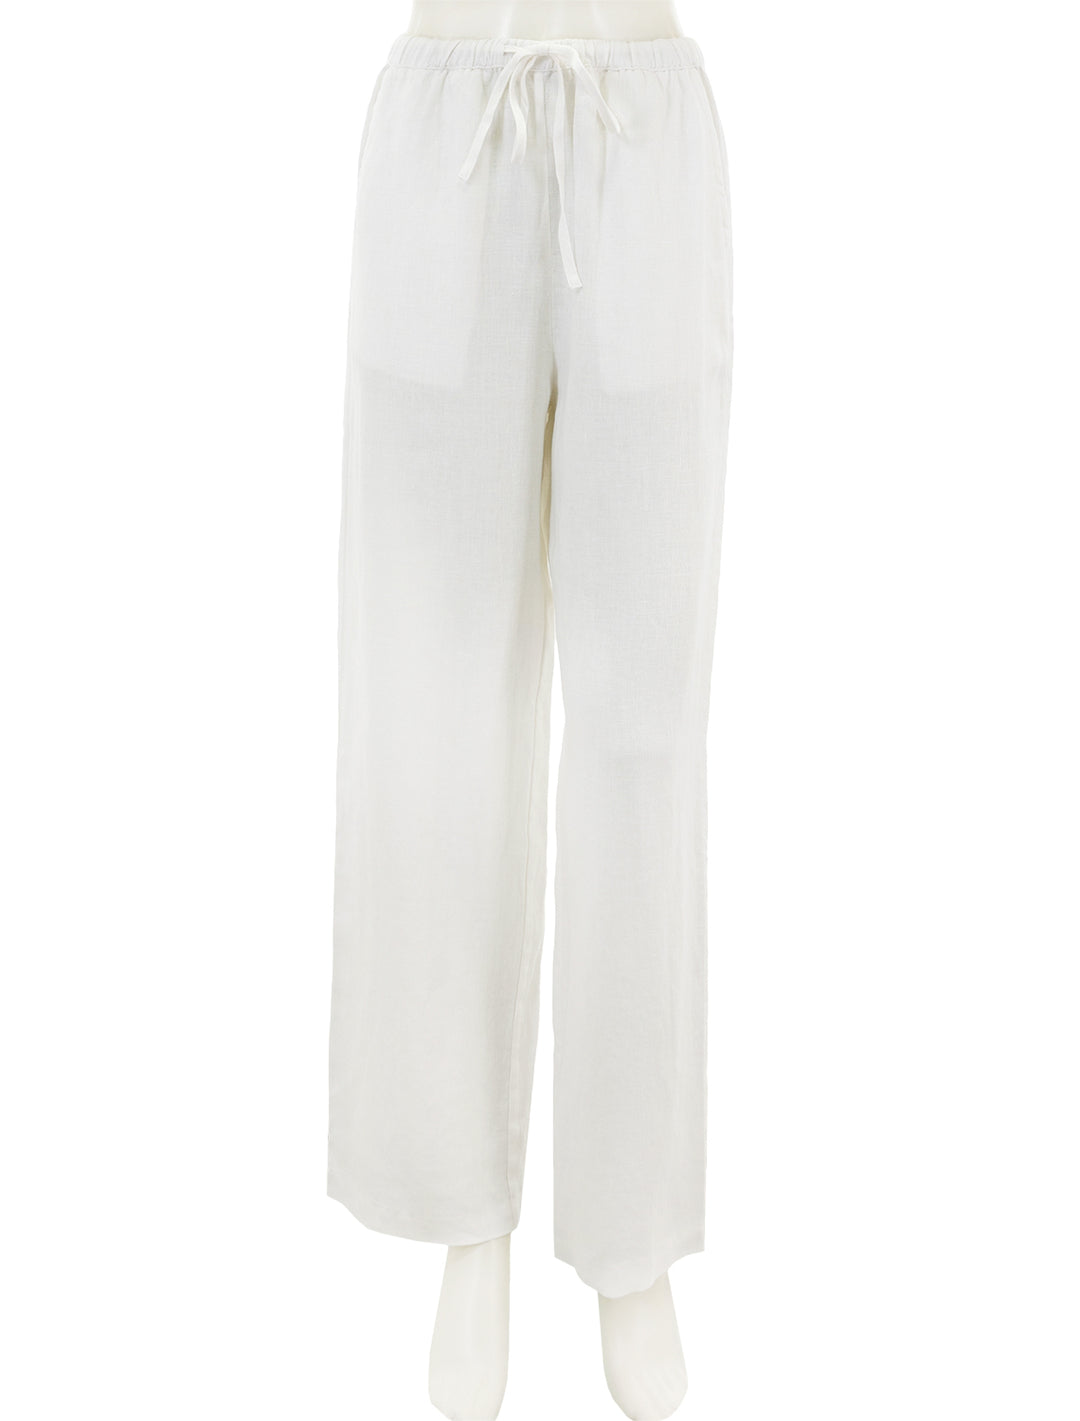 Front view of Rails' emmie linen pants in white.